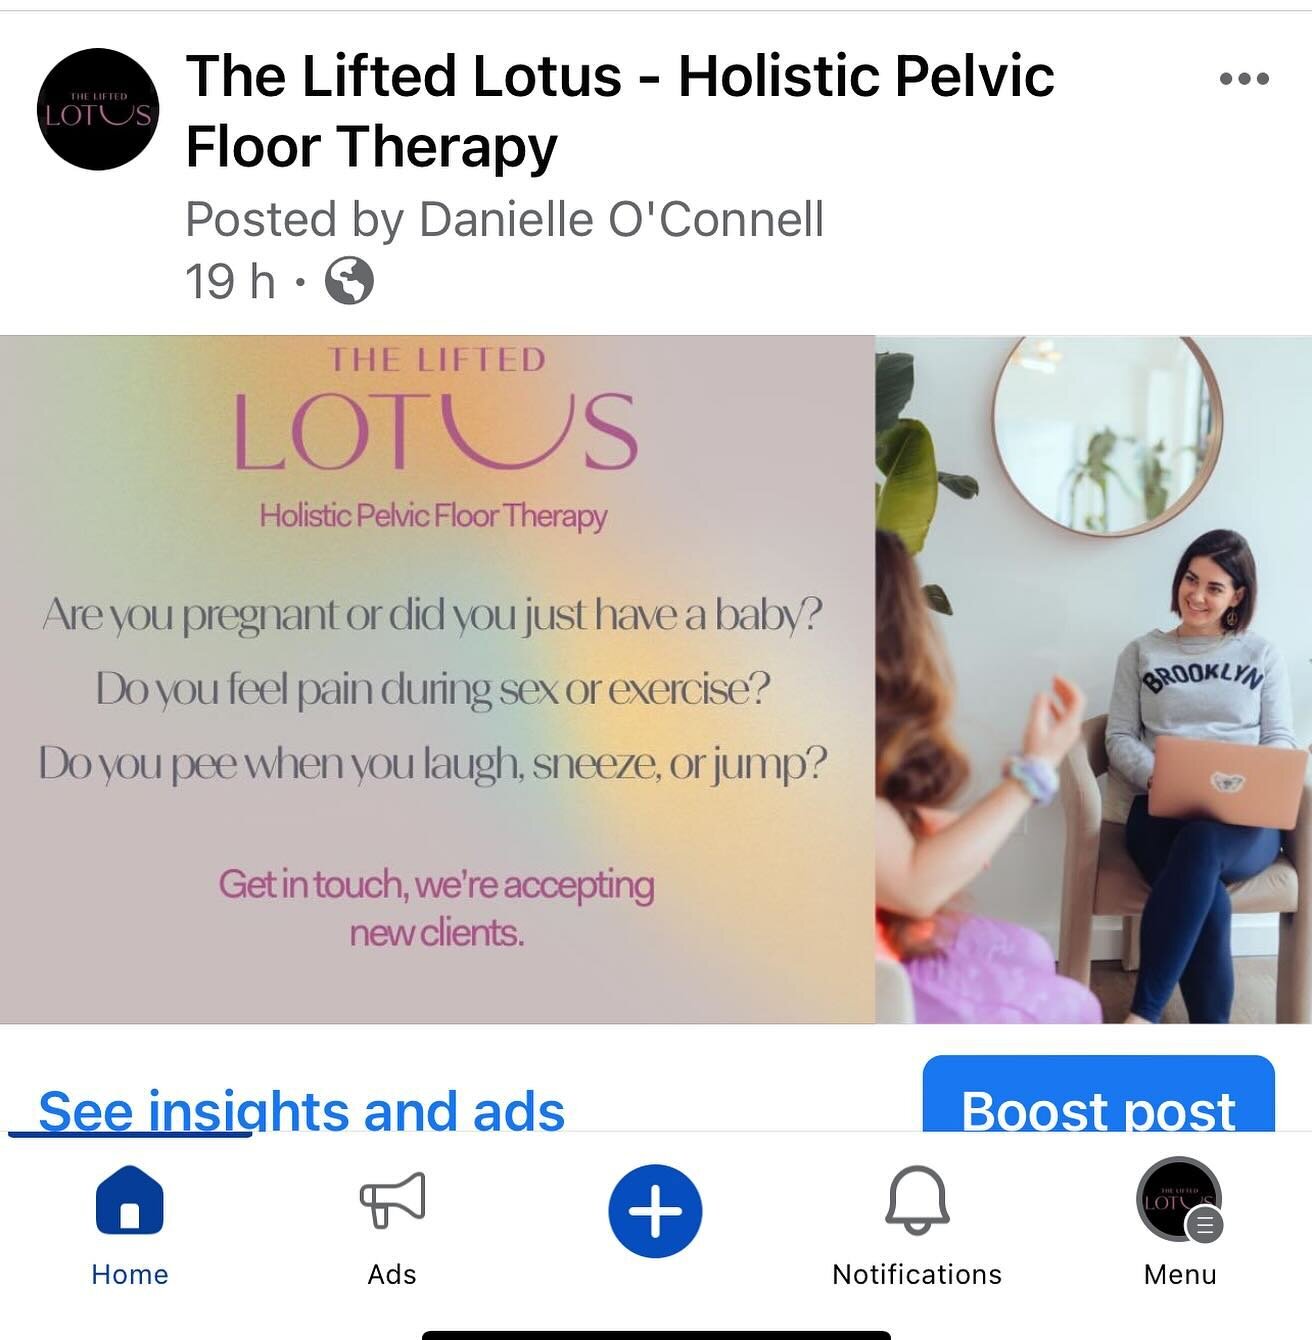 Thanks so much @danielle_oco, The Lifted Lotus now has a @facebook page! Small wins! 🪷🎉

#pelvicfloortherapy #pelvichealthadvocacy #shoutitfromtherooftops #selfcare #pregnancycare #postpartumcare #maternalcare #spreadtheword #smallbusinessowner #wo